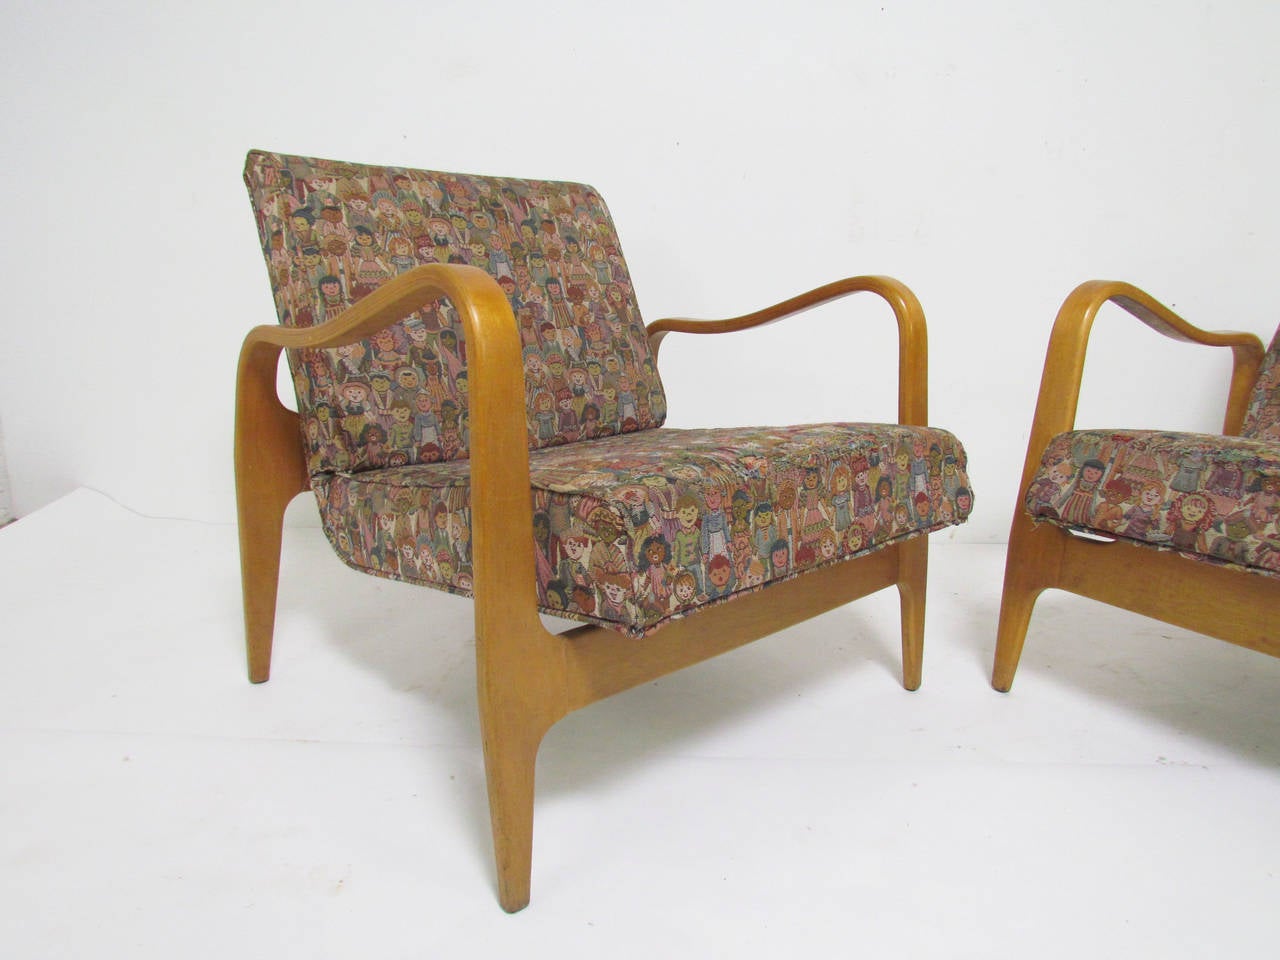 Pair of sculptural lounge armchairs with bent ply birch frames and elegantly tapered legs. Unmarked, but most likely by Thonet.